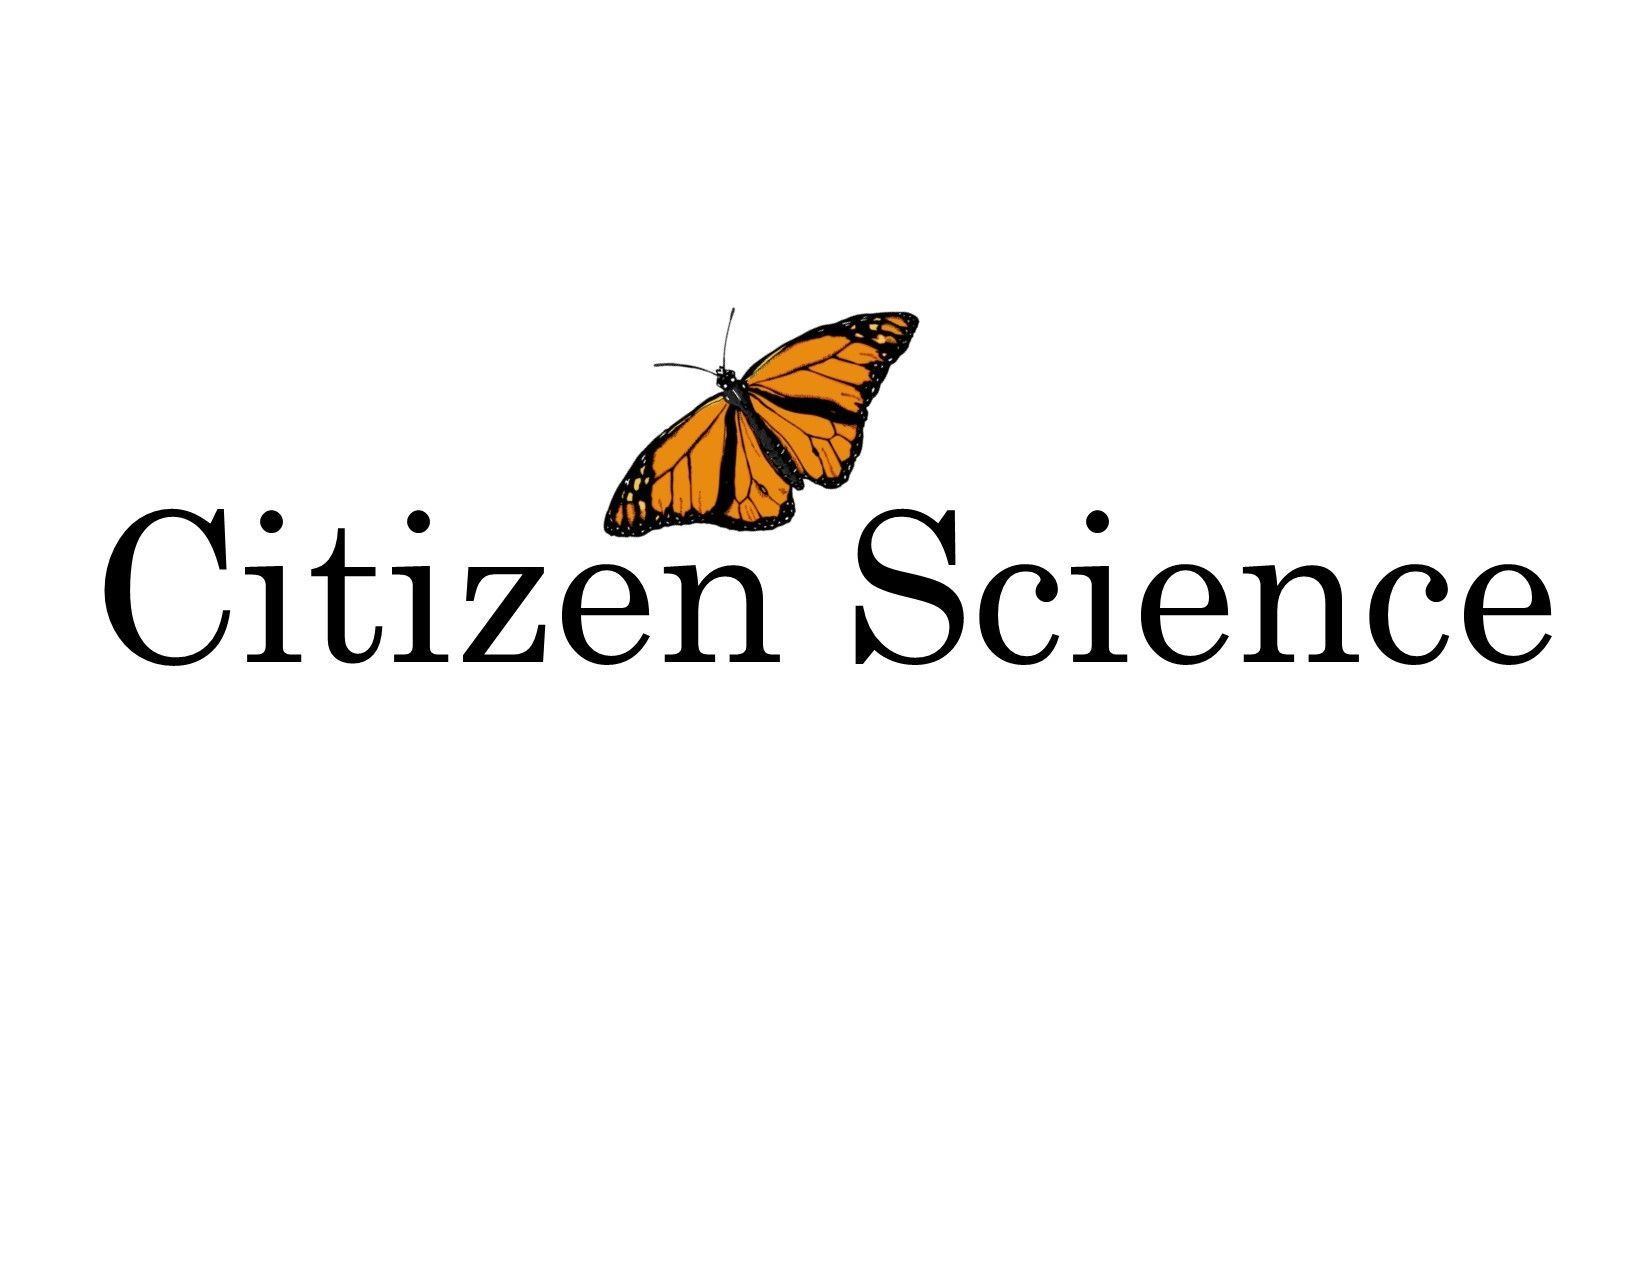 Citizen Science - July 19, 2022